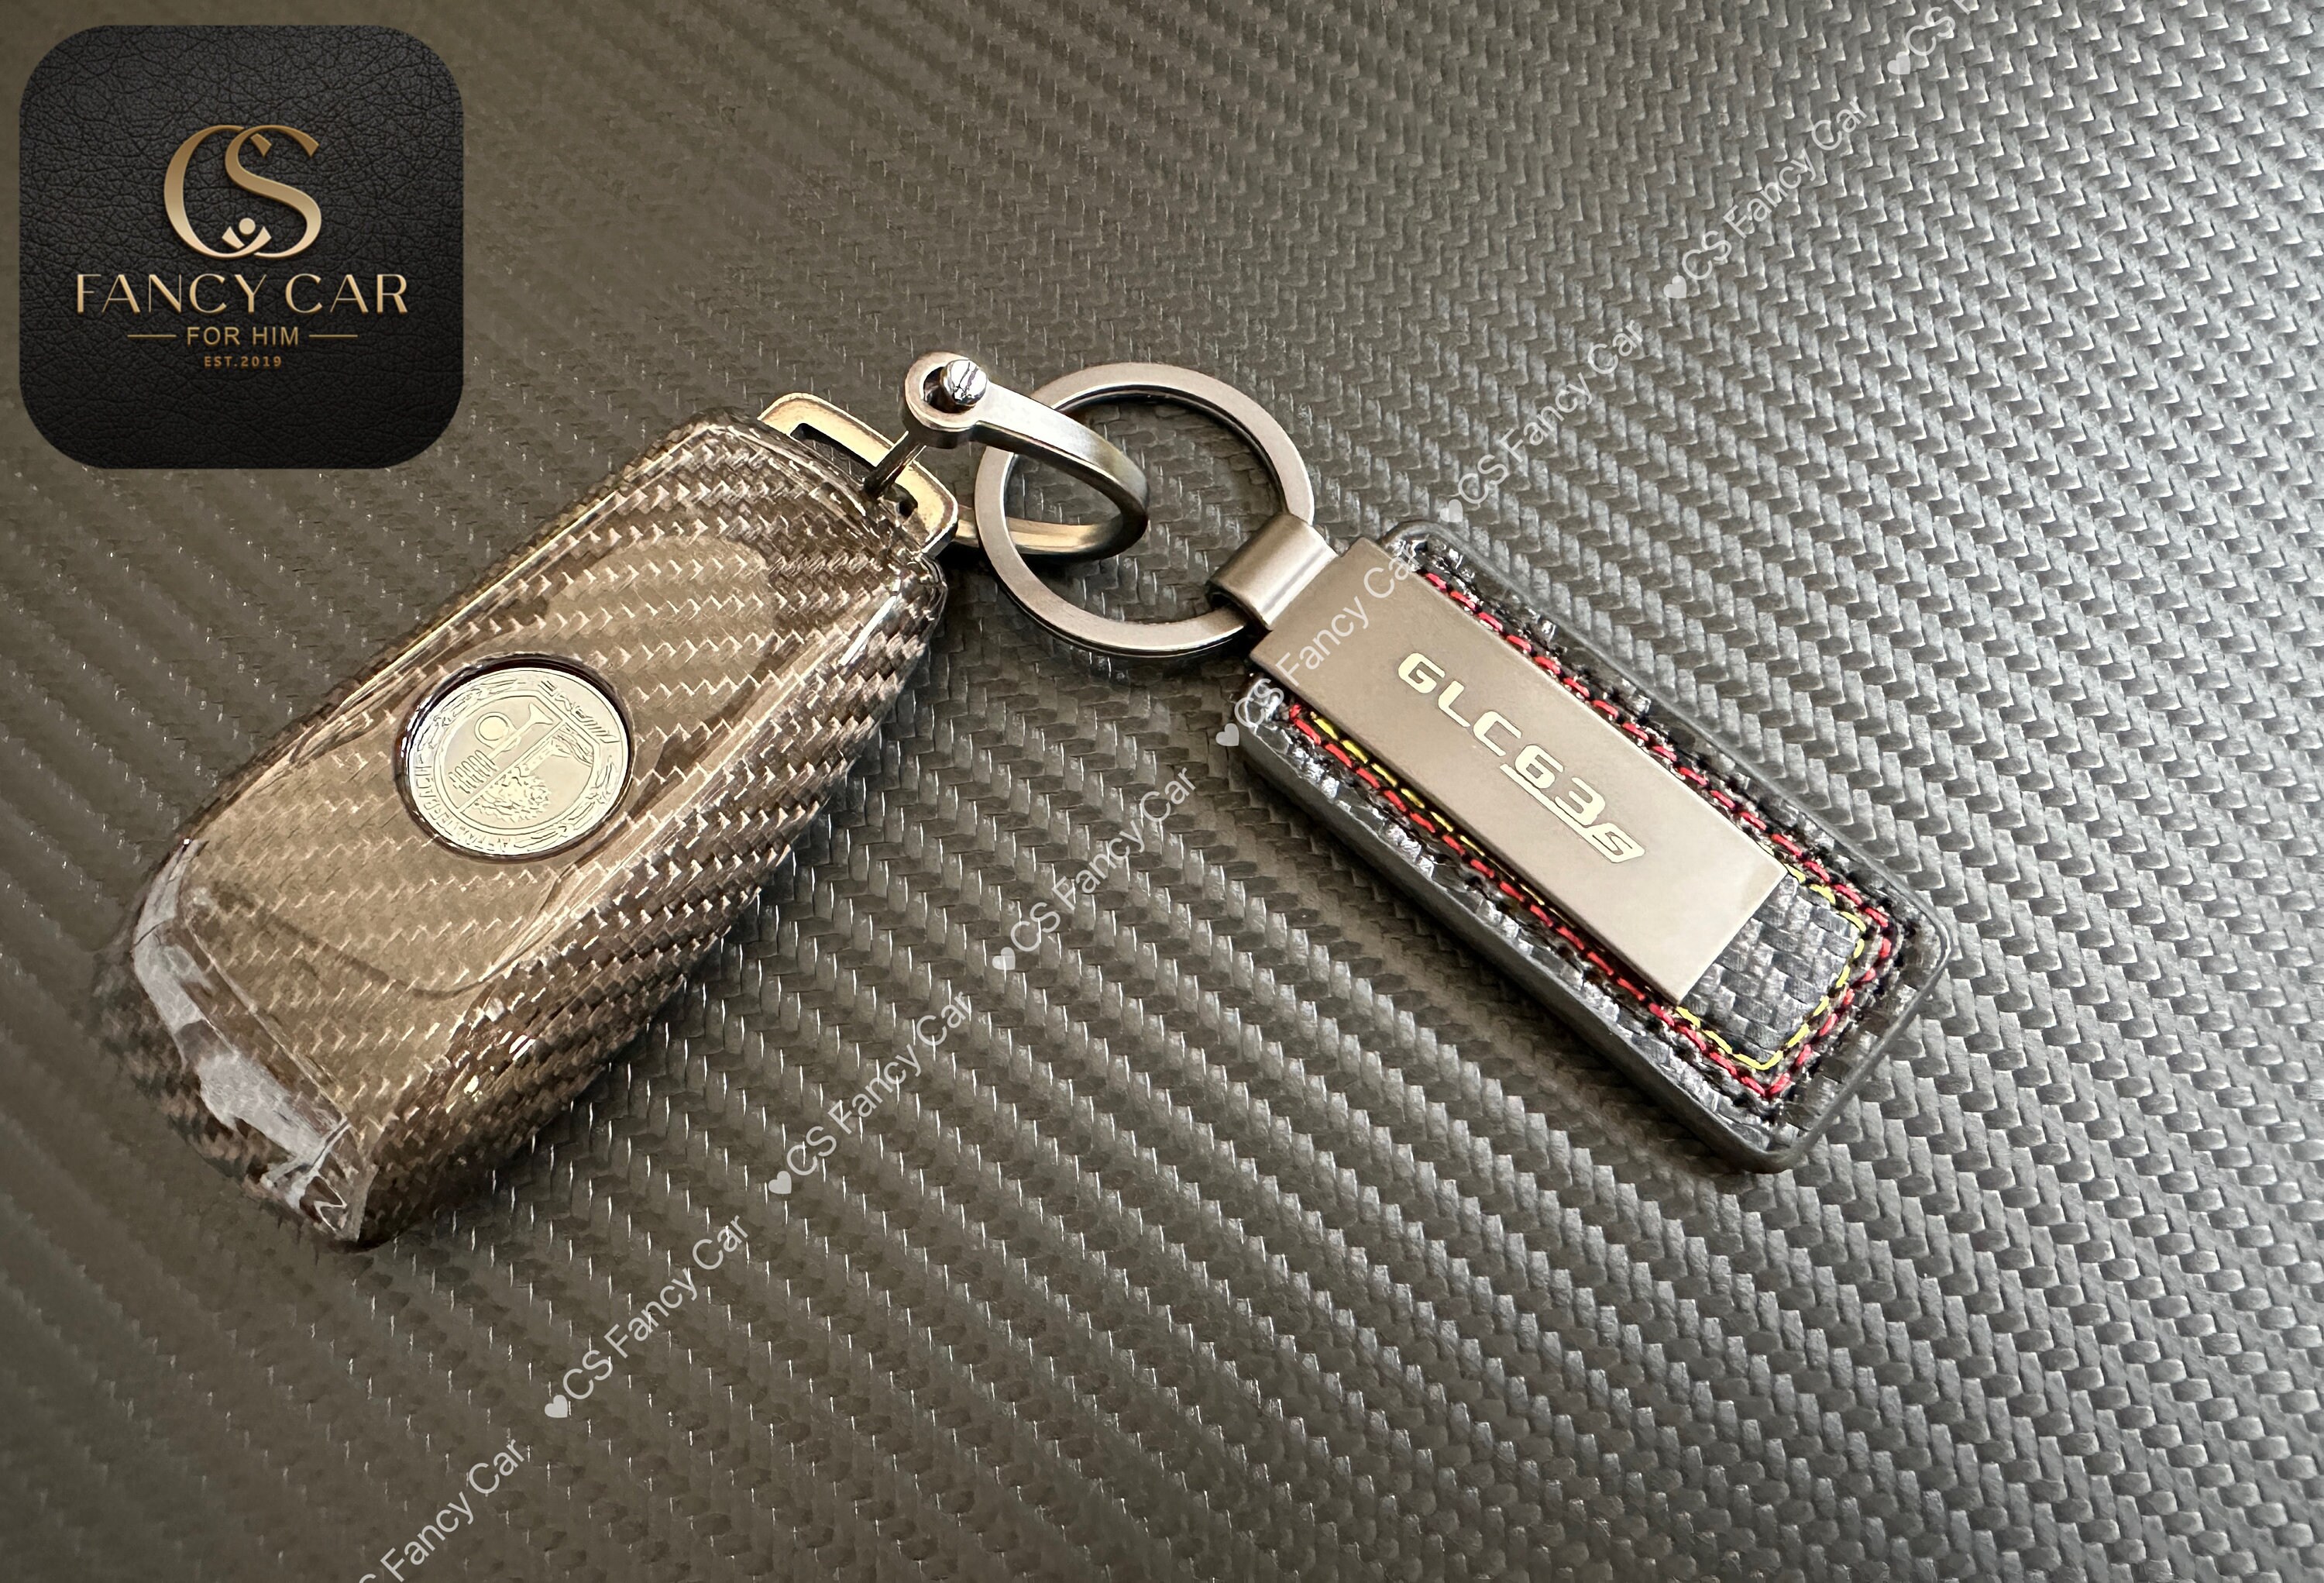  MONOCARBON Real Carbon Fiber Key Chain with Real Leather Edges  Keychain Black Stitching Keychain for Men Black : Clothing, Shoes & Jewelry